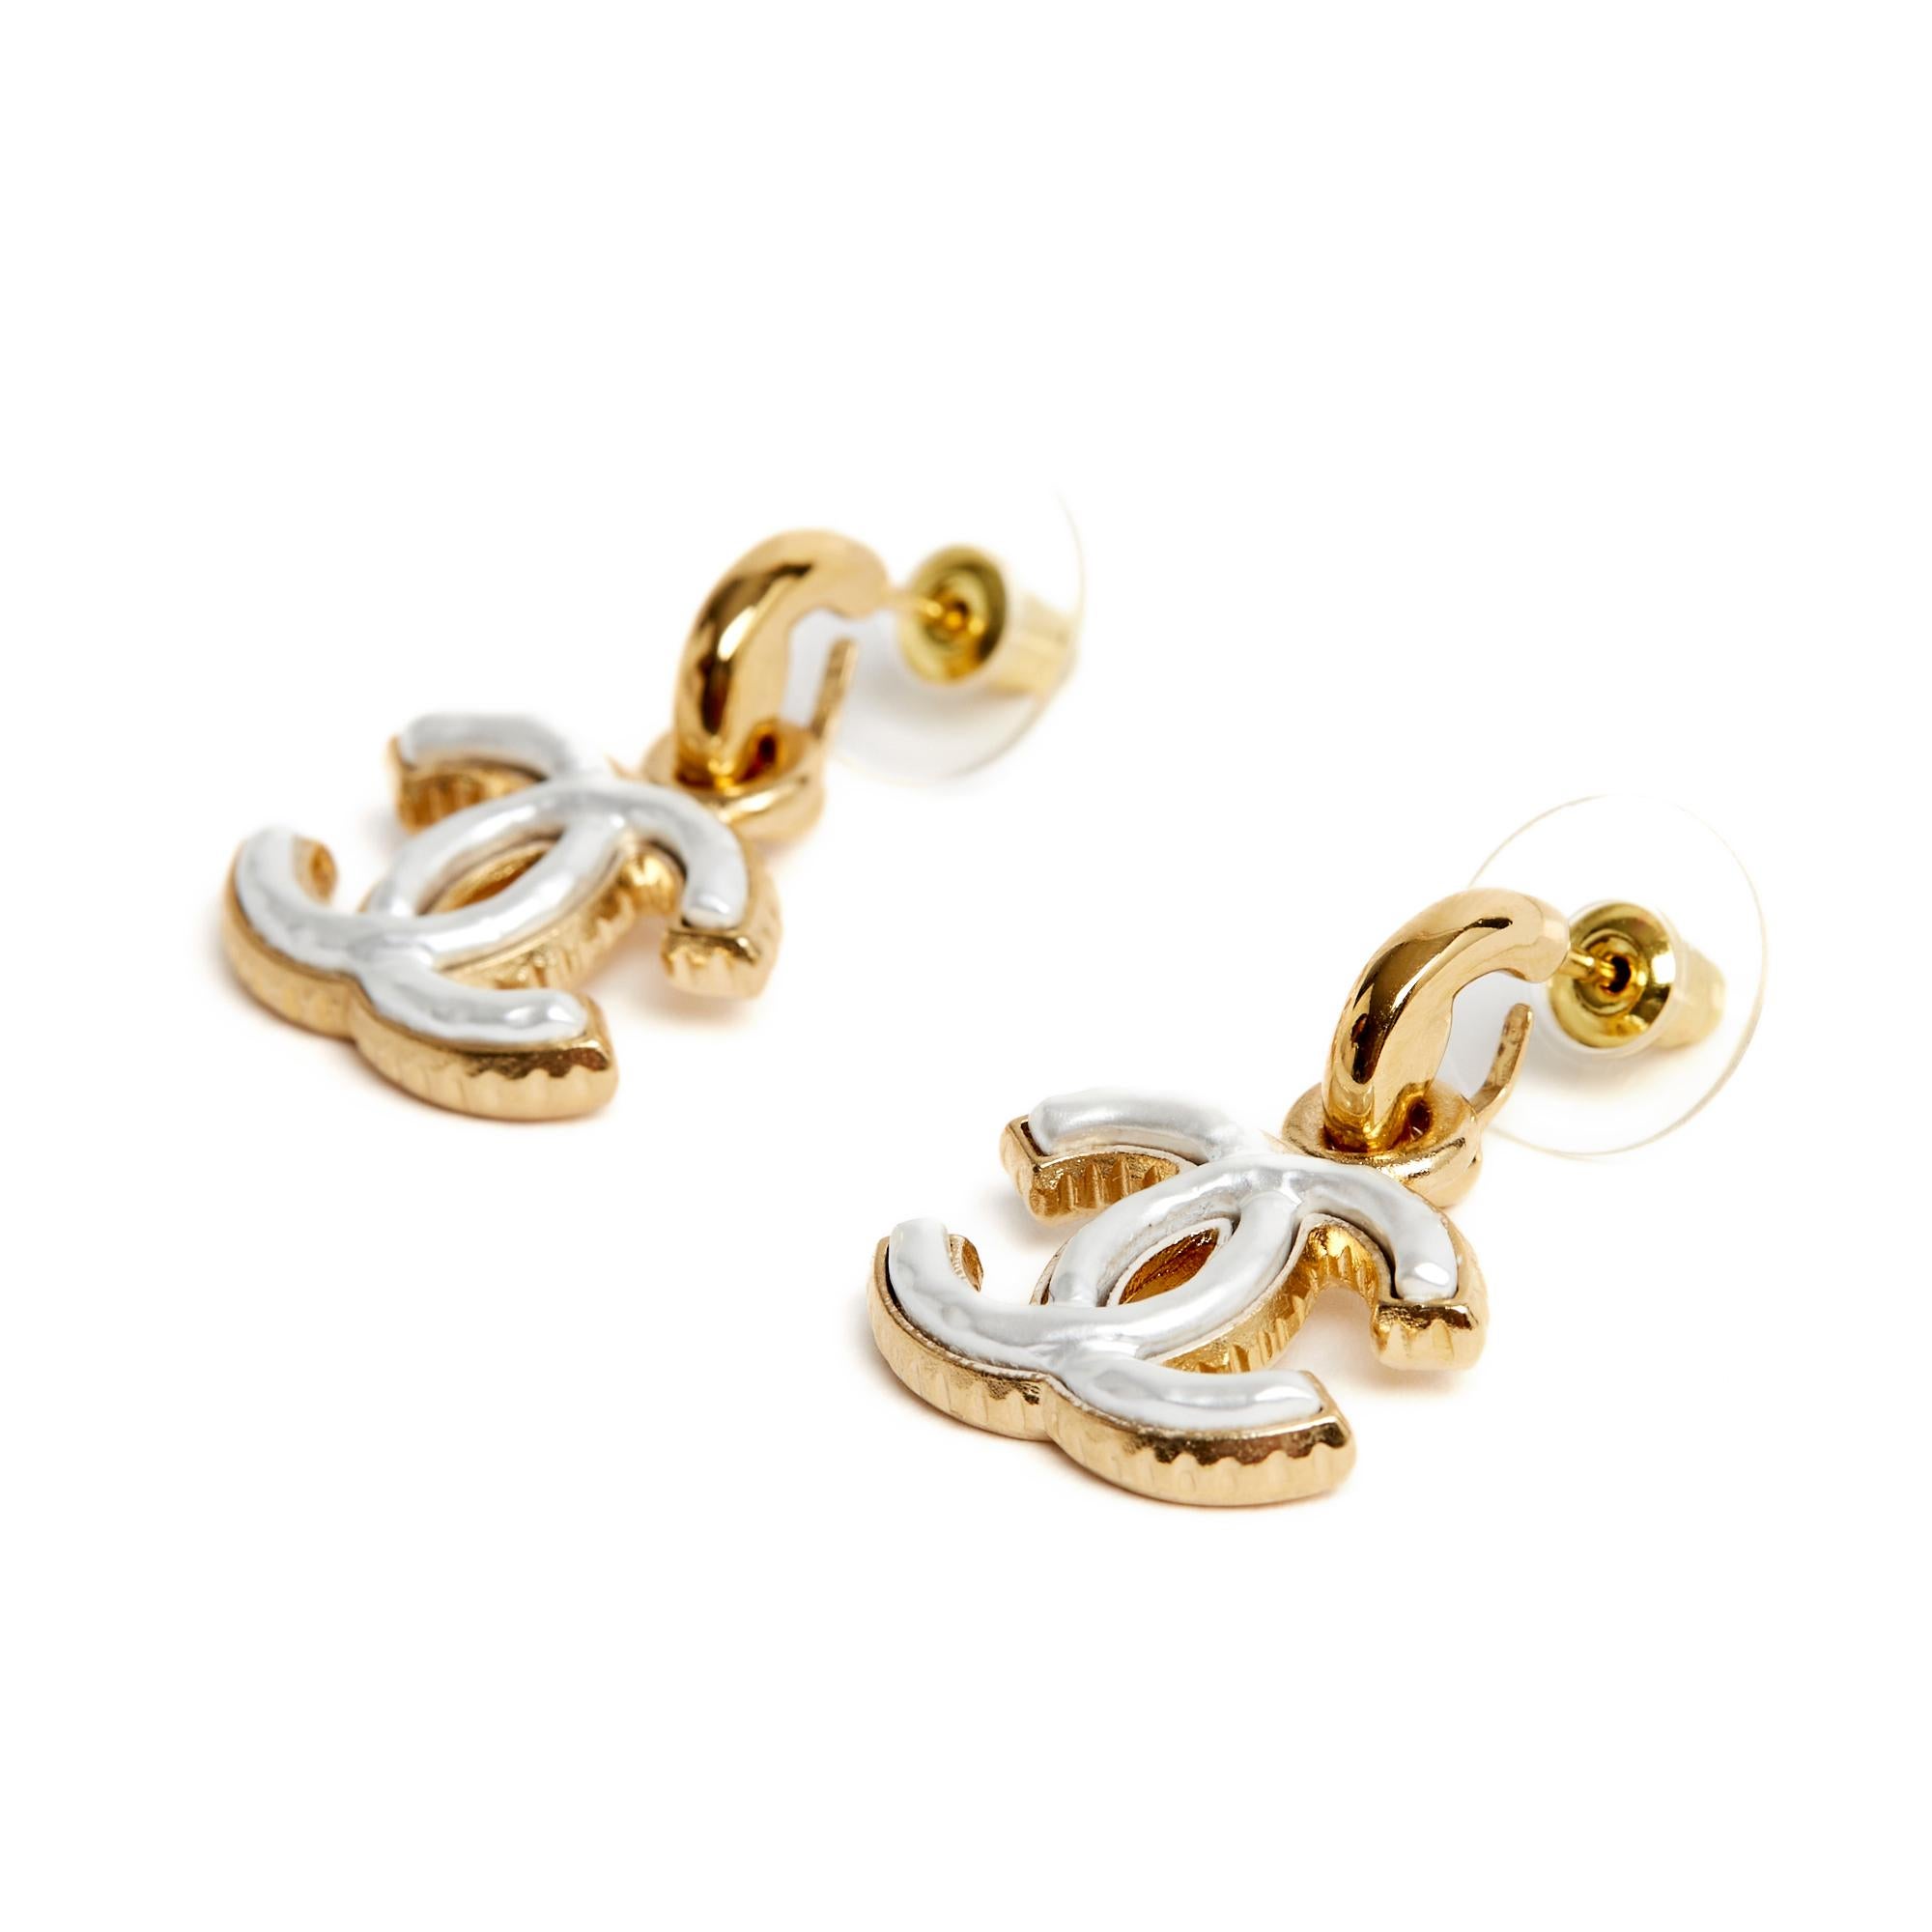 Chanel earrings composed of a very small hoop and a pendant with the motif of a Chanel CC logo in gilt metal inlaid with white mother-of-pearl (fantasy). Total height of the earring 2.65 cm, dimensions of the CC 2 x 1.5cm. The earrings are from a